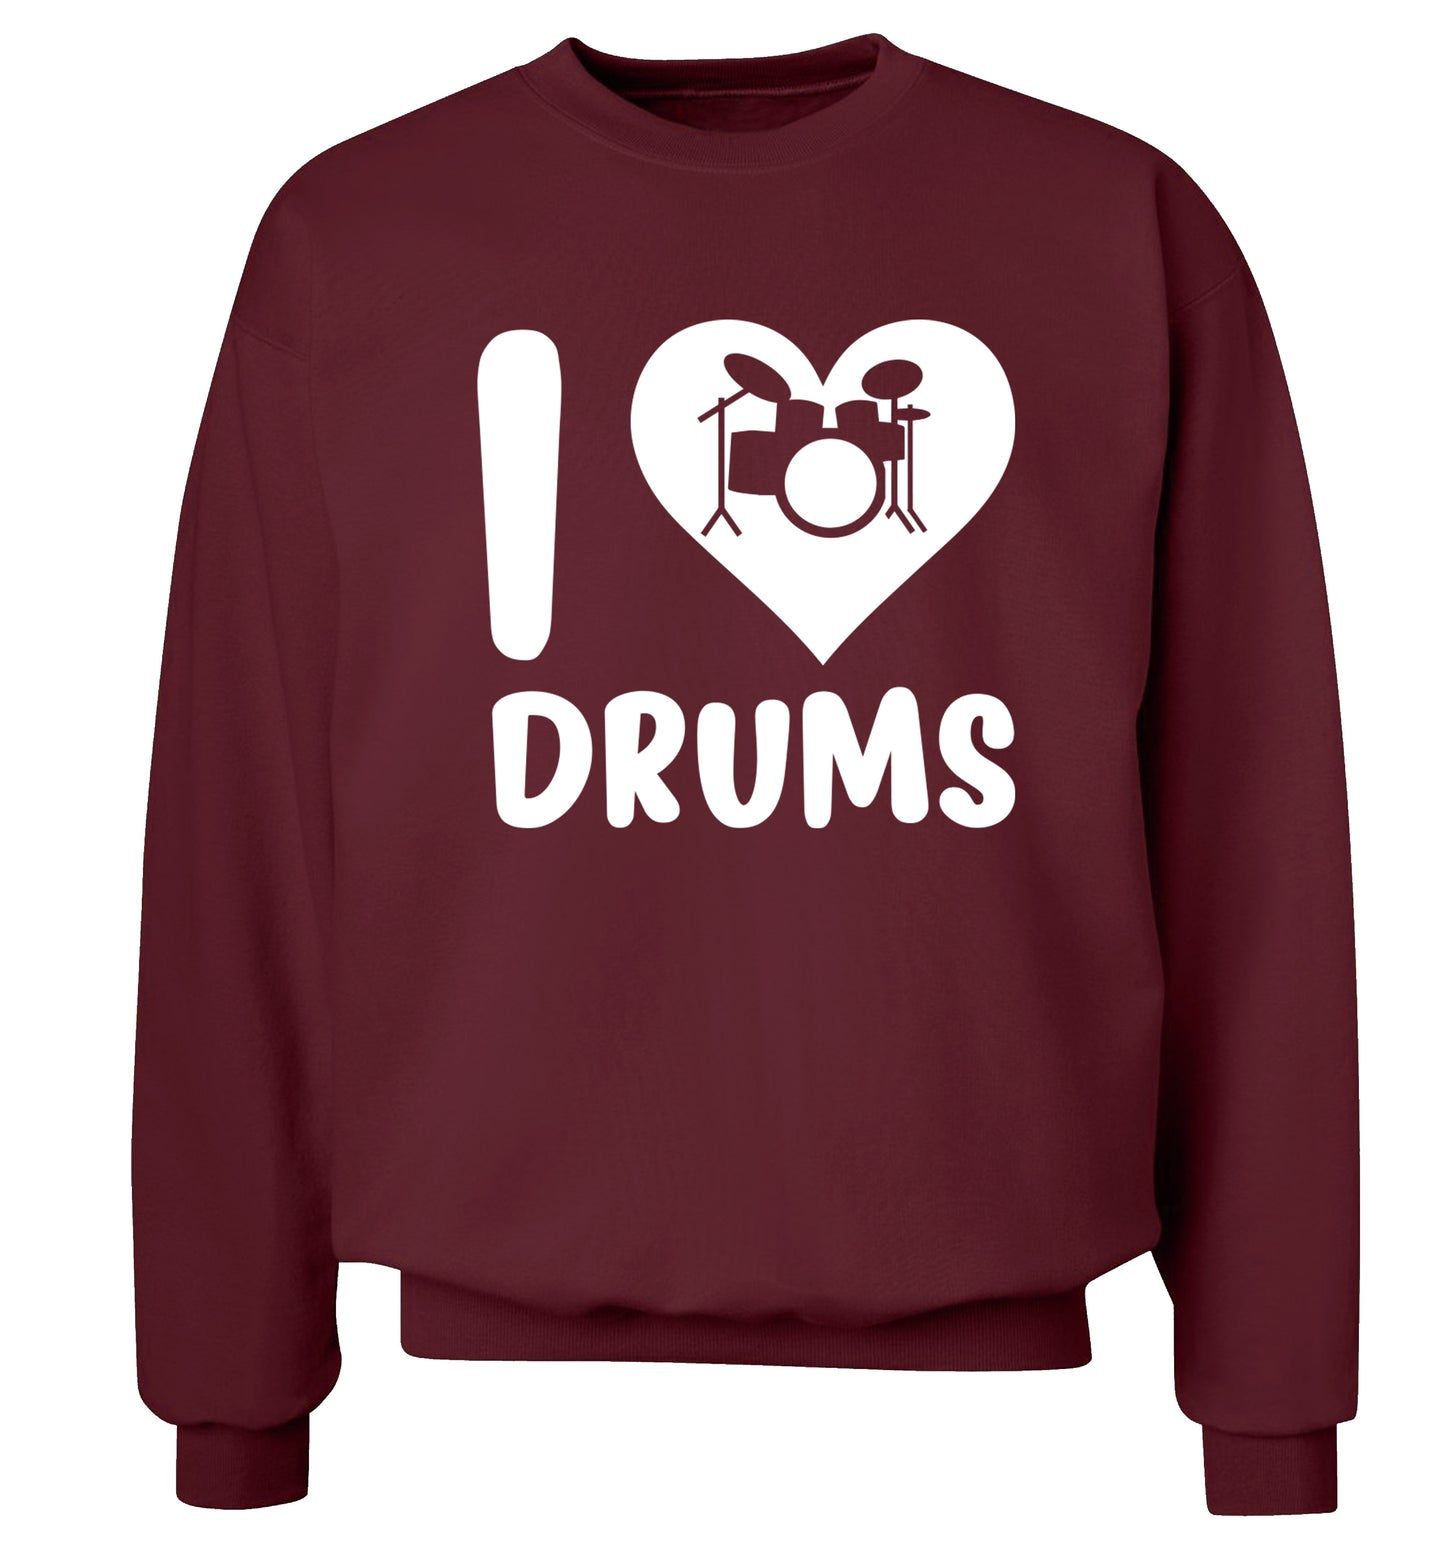 I love drums Adult's unisex maroon Sweater 2XL